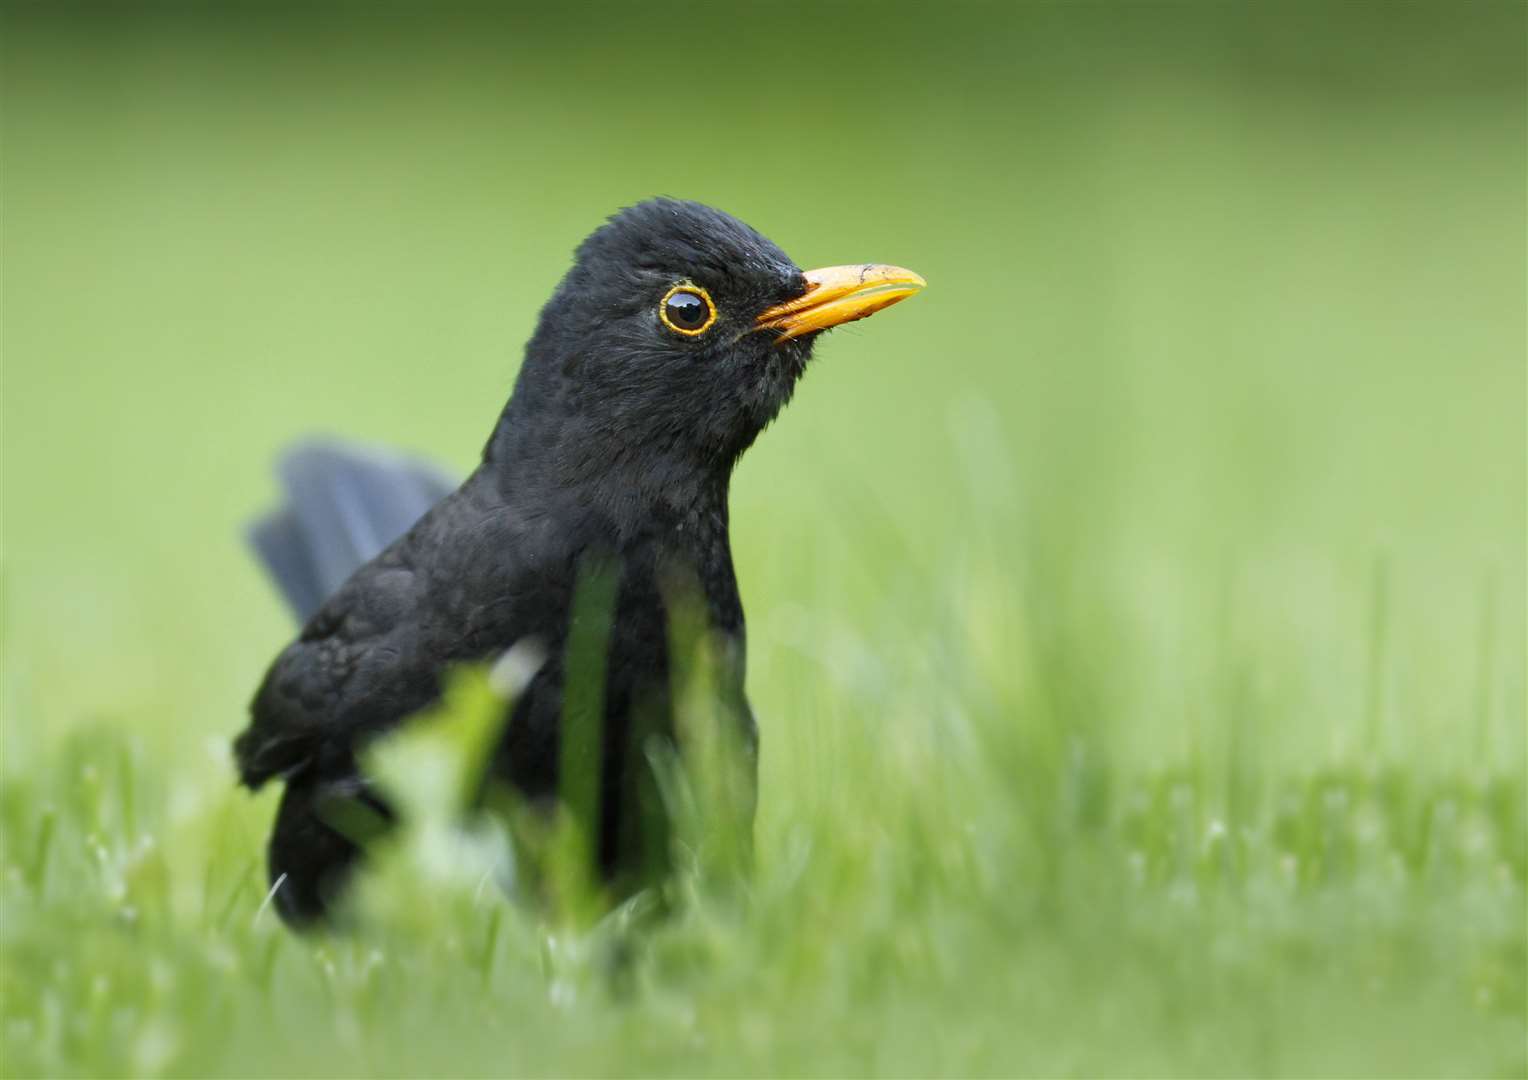 You might see birds like blackbirds Picture: Jon Hawkins Surrey Hill Photography